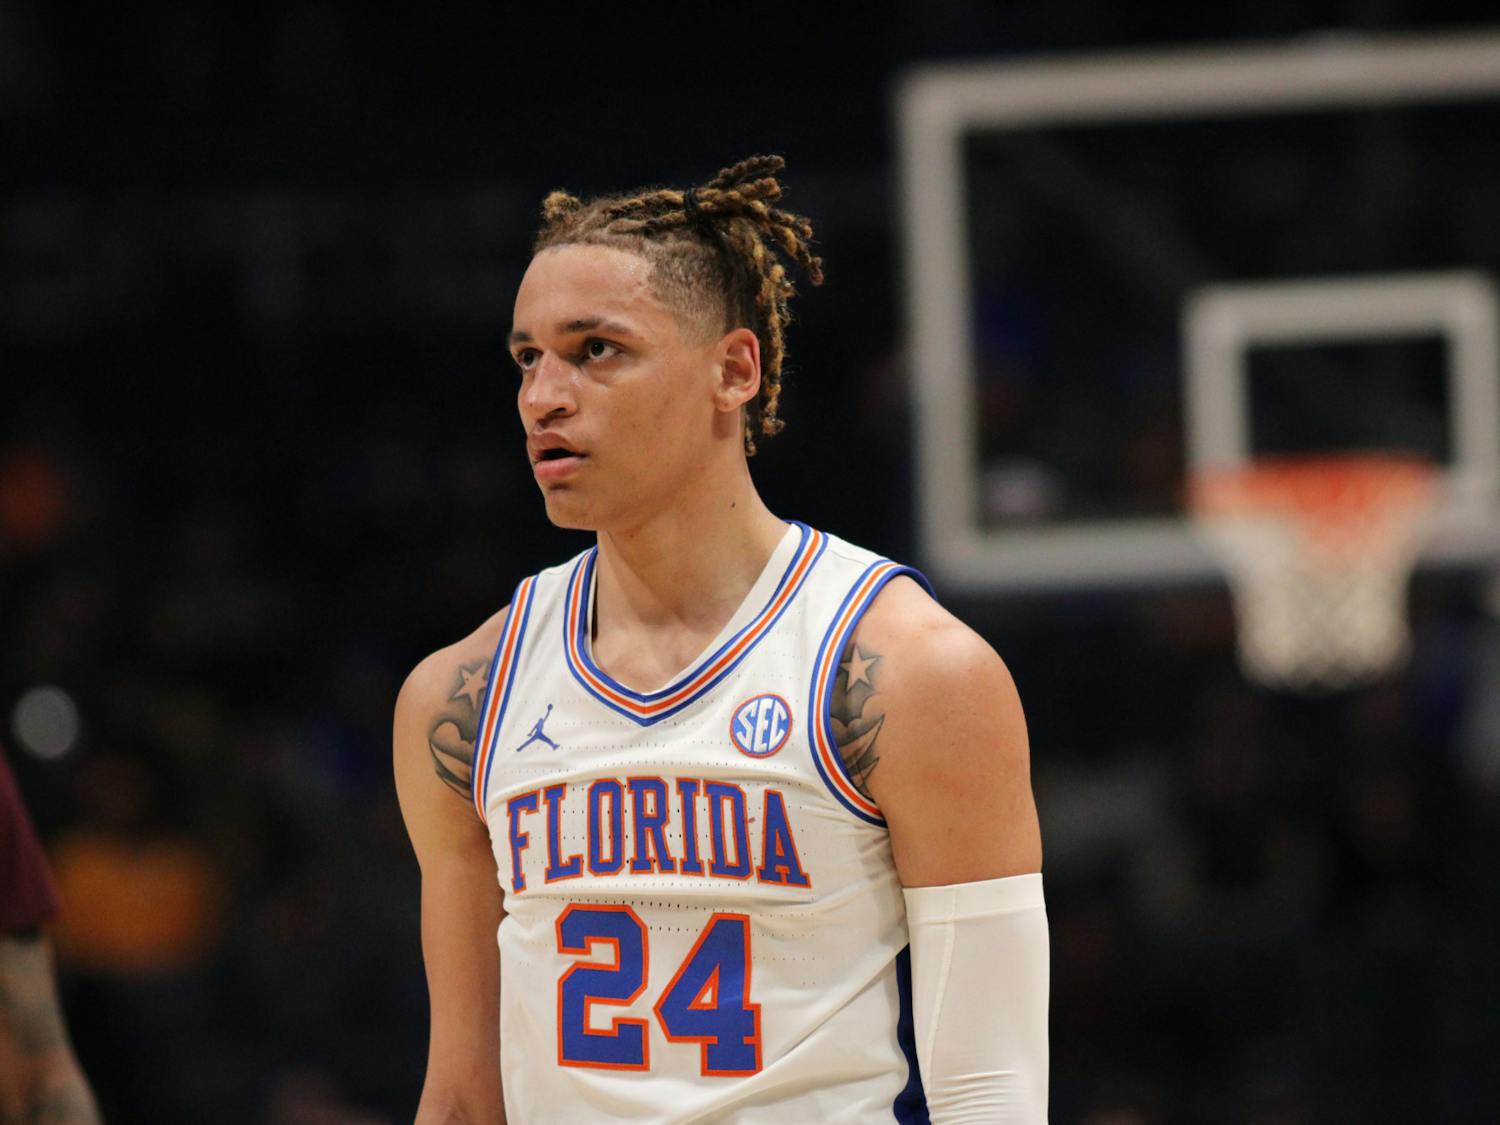 Florida guard Riley Kugel stands on the court during the Gators' 69-68 loss to the Mississippi State Bulldogs in the second round of the Southeastern Conference Tournament Thursday, March 9, 2023.